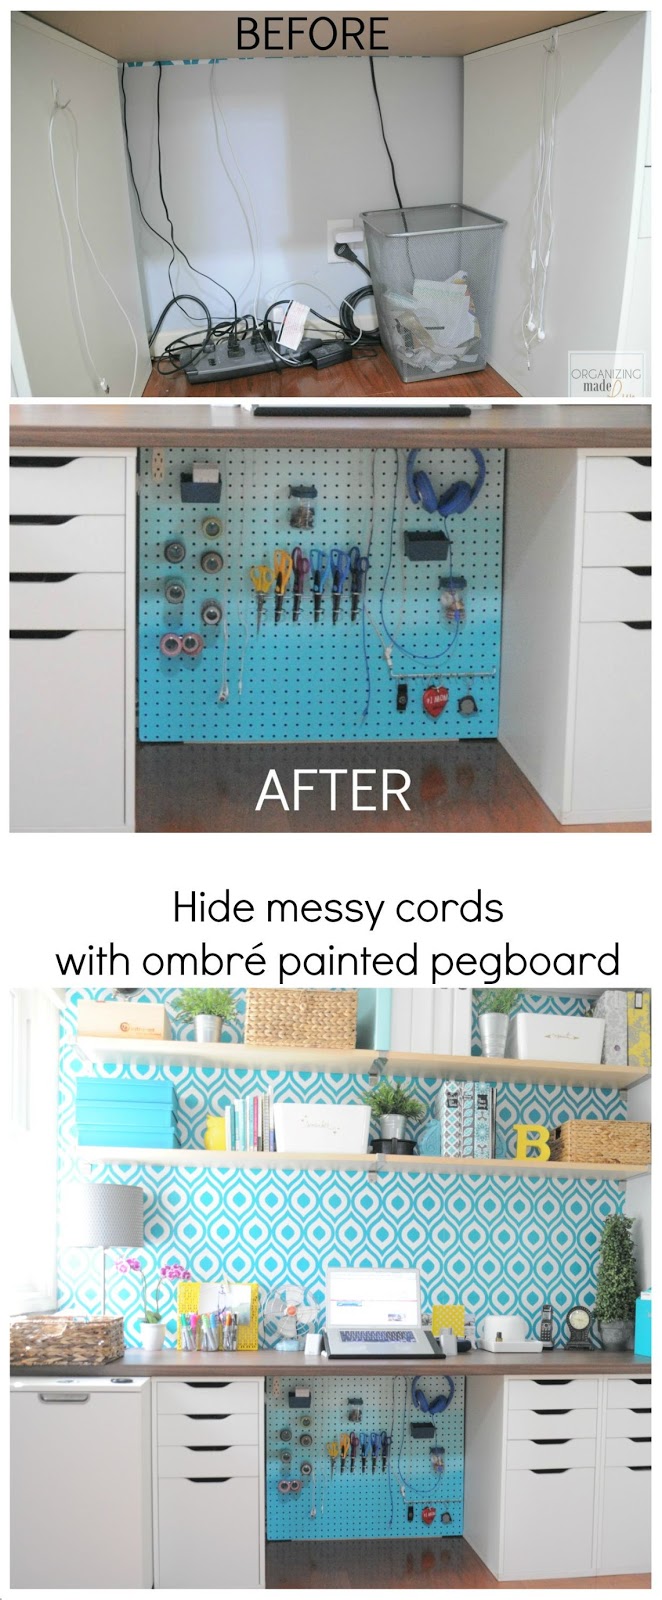 Before and After - Hide messy cords with ombré painted pegboard :: OrganizingMadeFun.com